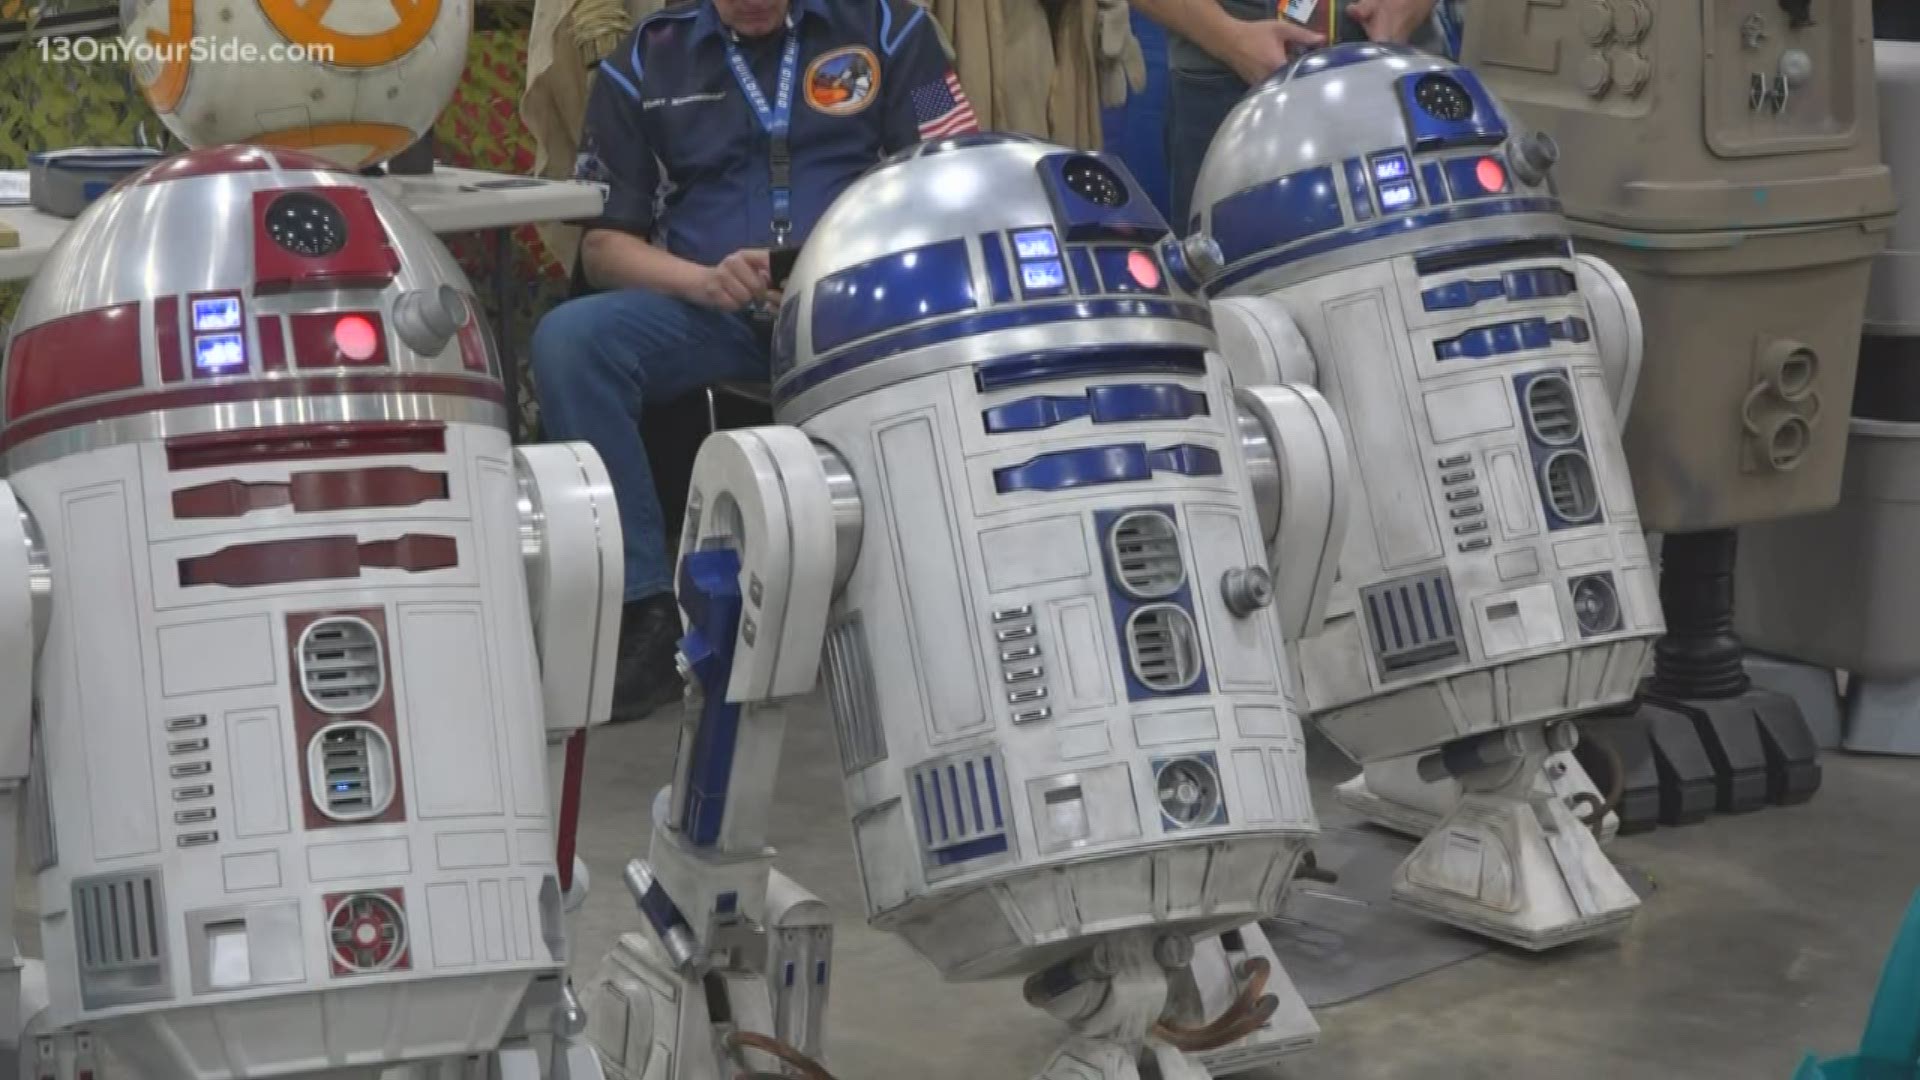 The annual Grand Rapids Comic Con brought costumed crowds to the DeVos Place this weekend.